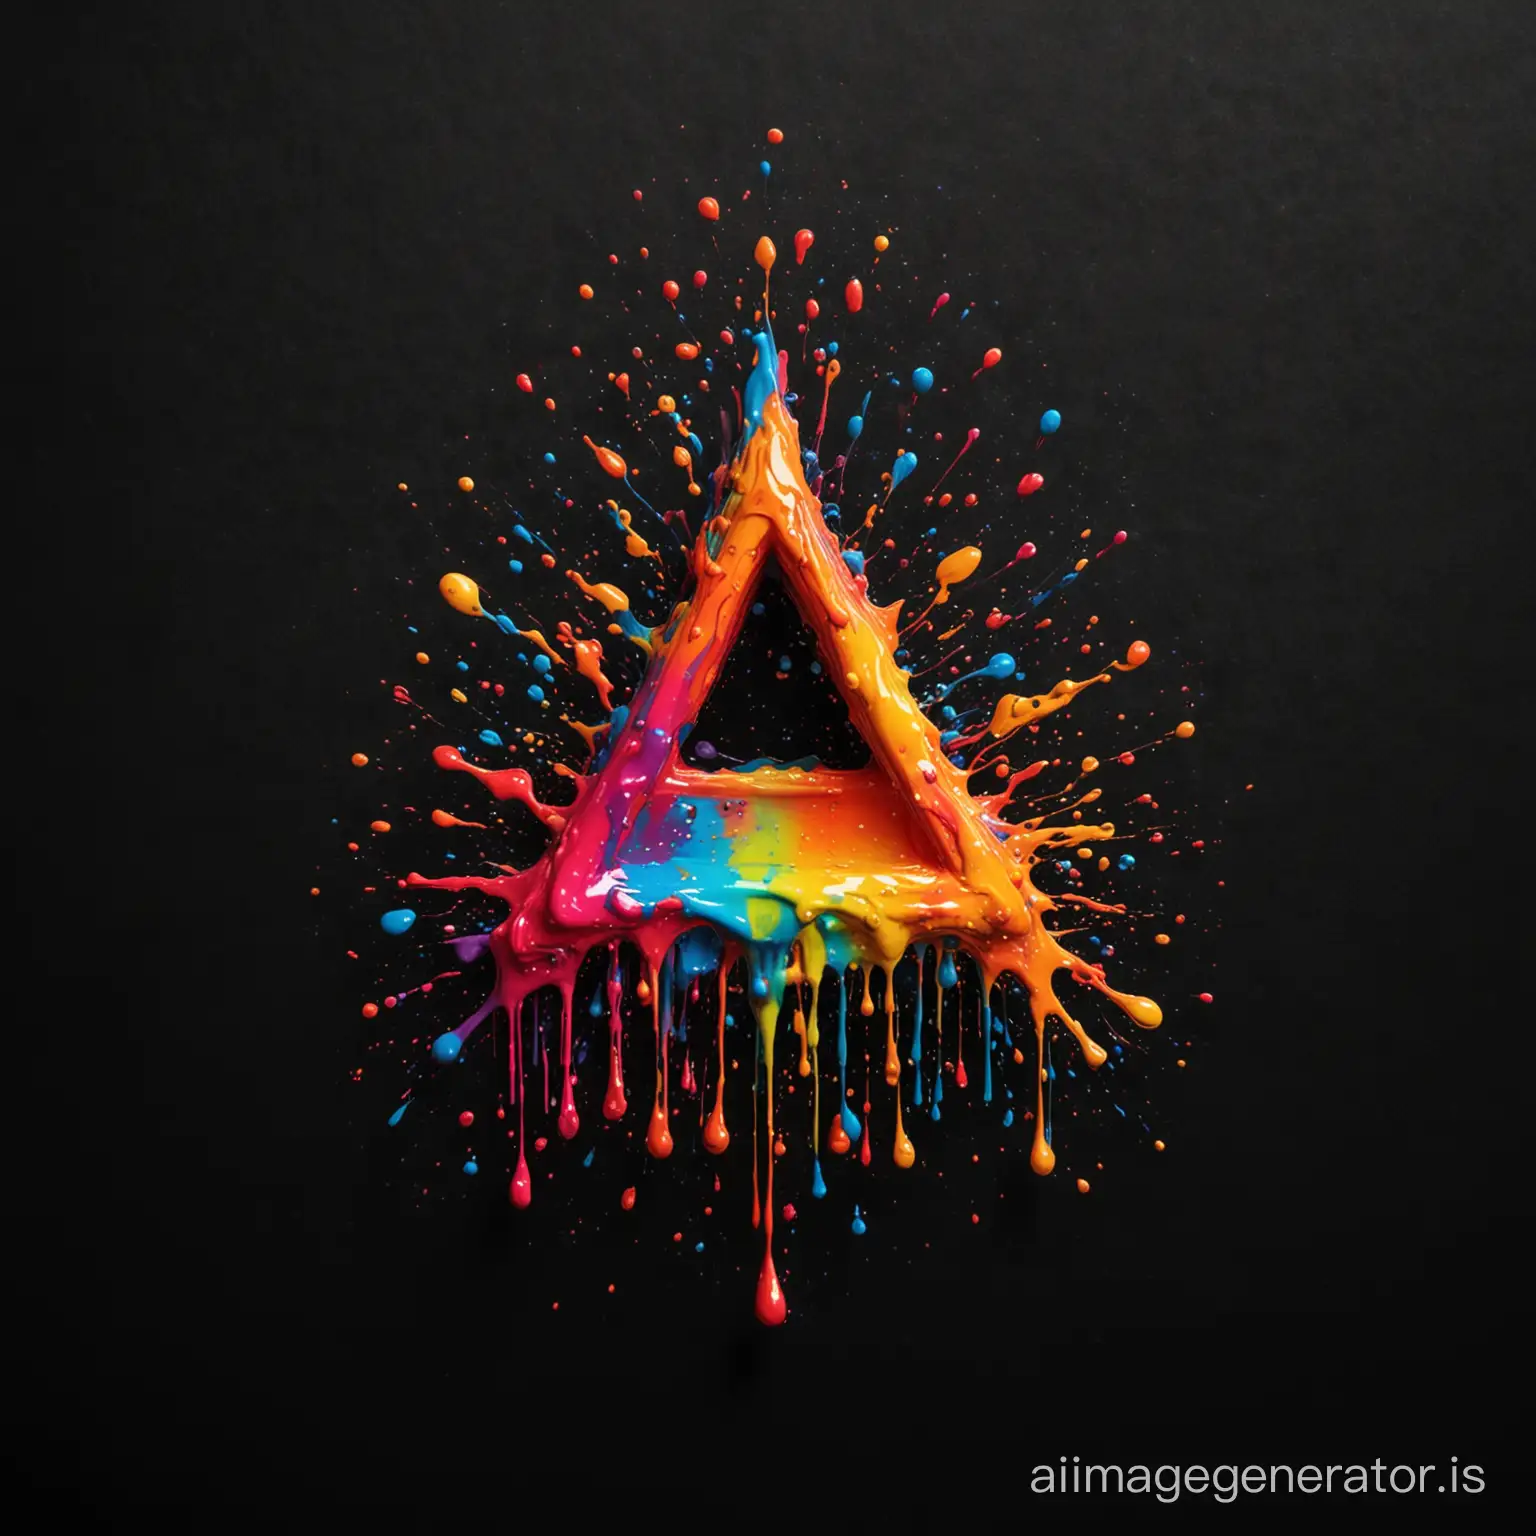 a liquid triangle shape with drops and splashes of bright colored paint on a black background